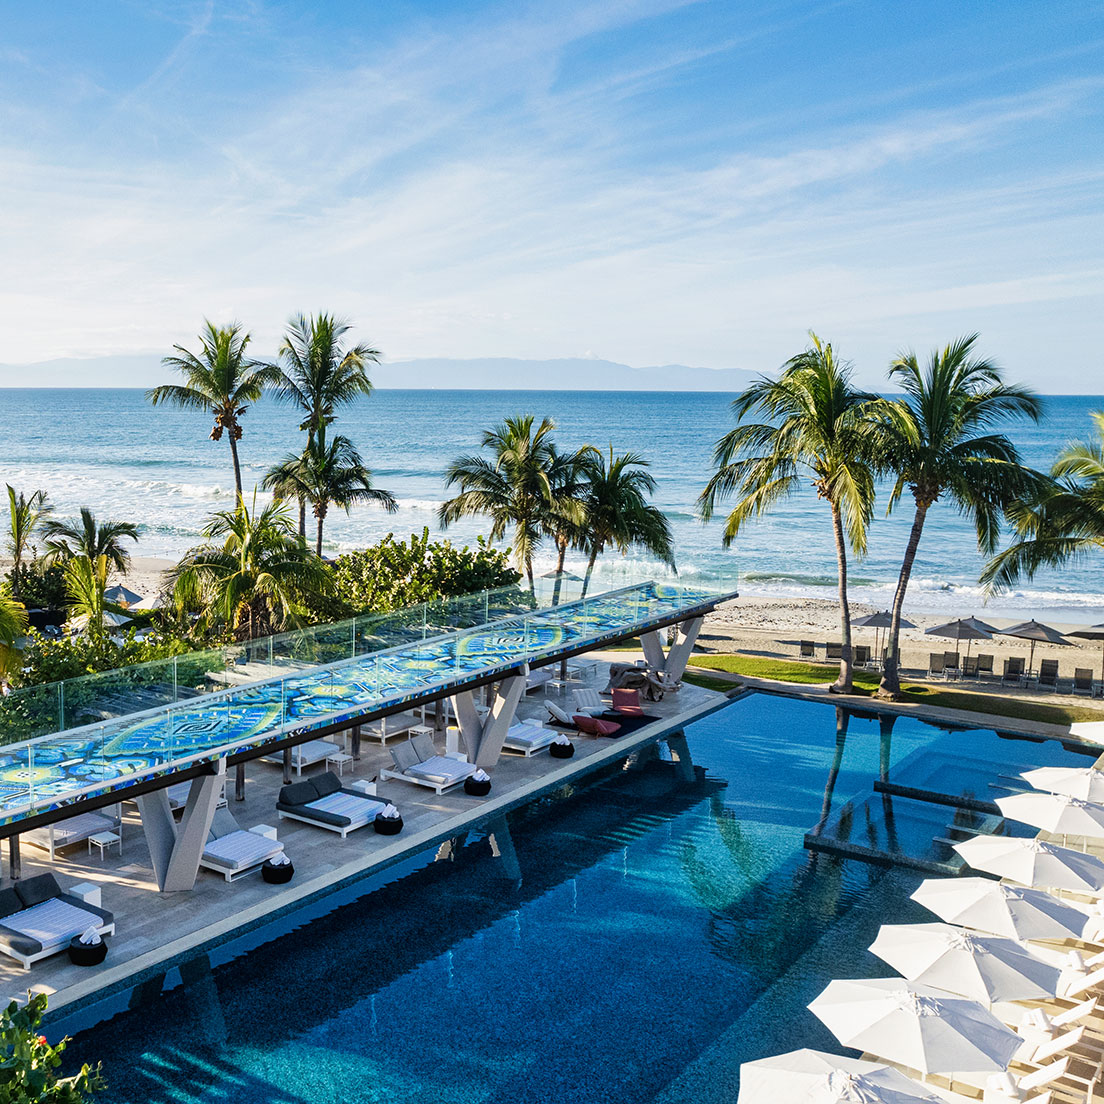 A luxurious beachfront resort features an expansive pool with sunbeds and umbrellas, surrounded by tall palm trees. The pool overlooks a serene ocean, offering clear views of the blue sky and distant mountains.